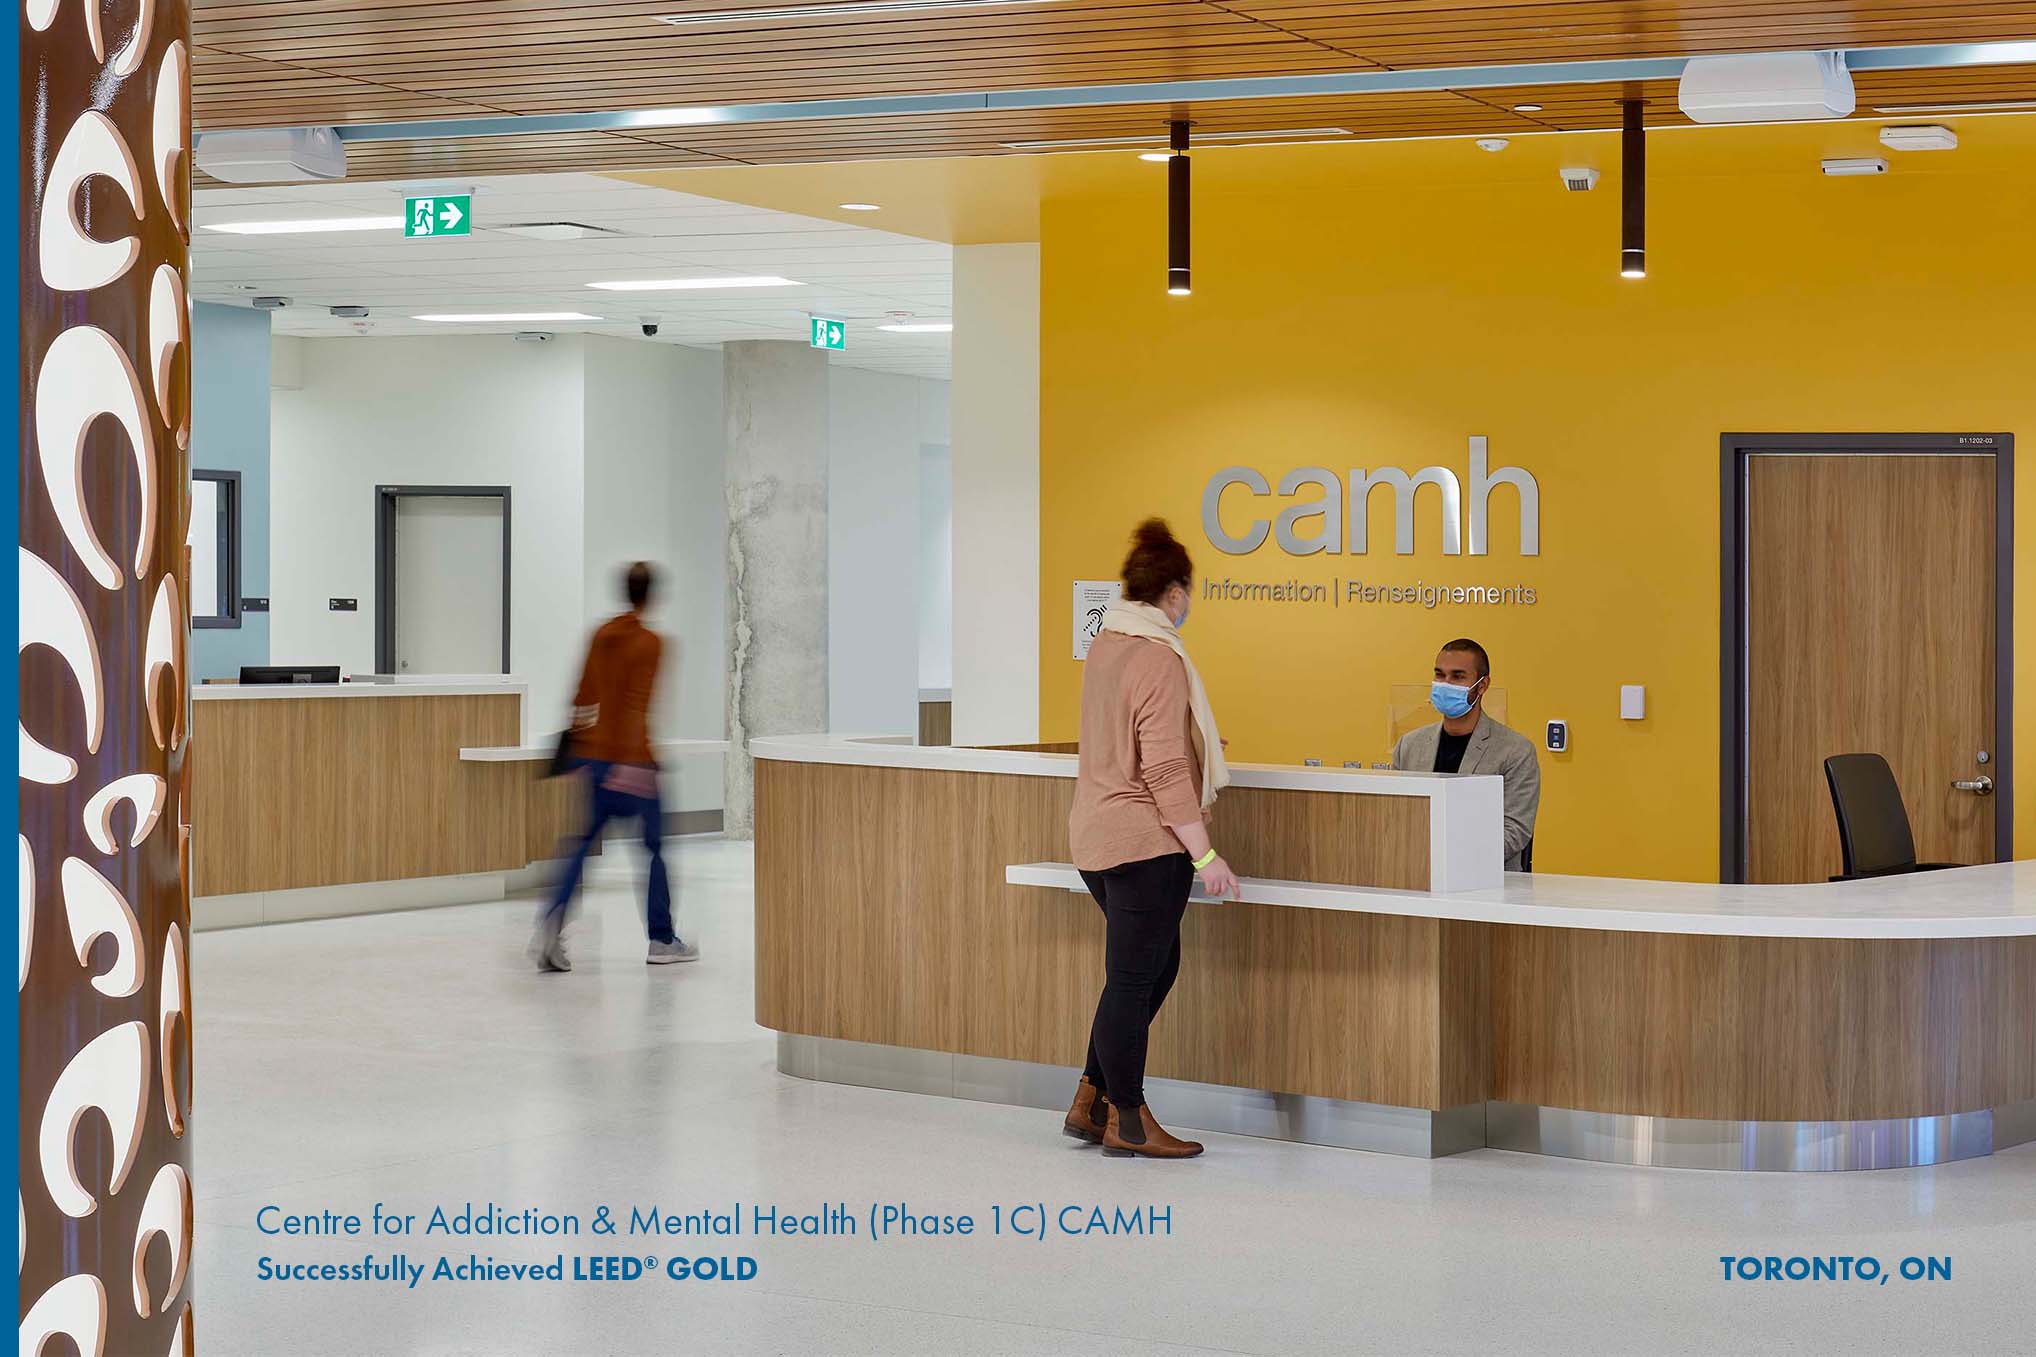 Reception desk at the Centre for Addiction and Mental Health (Phase 1C)